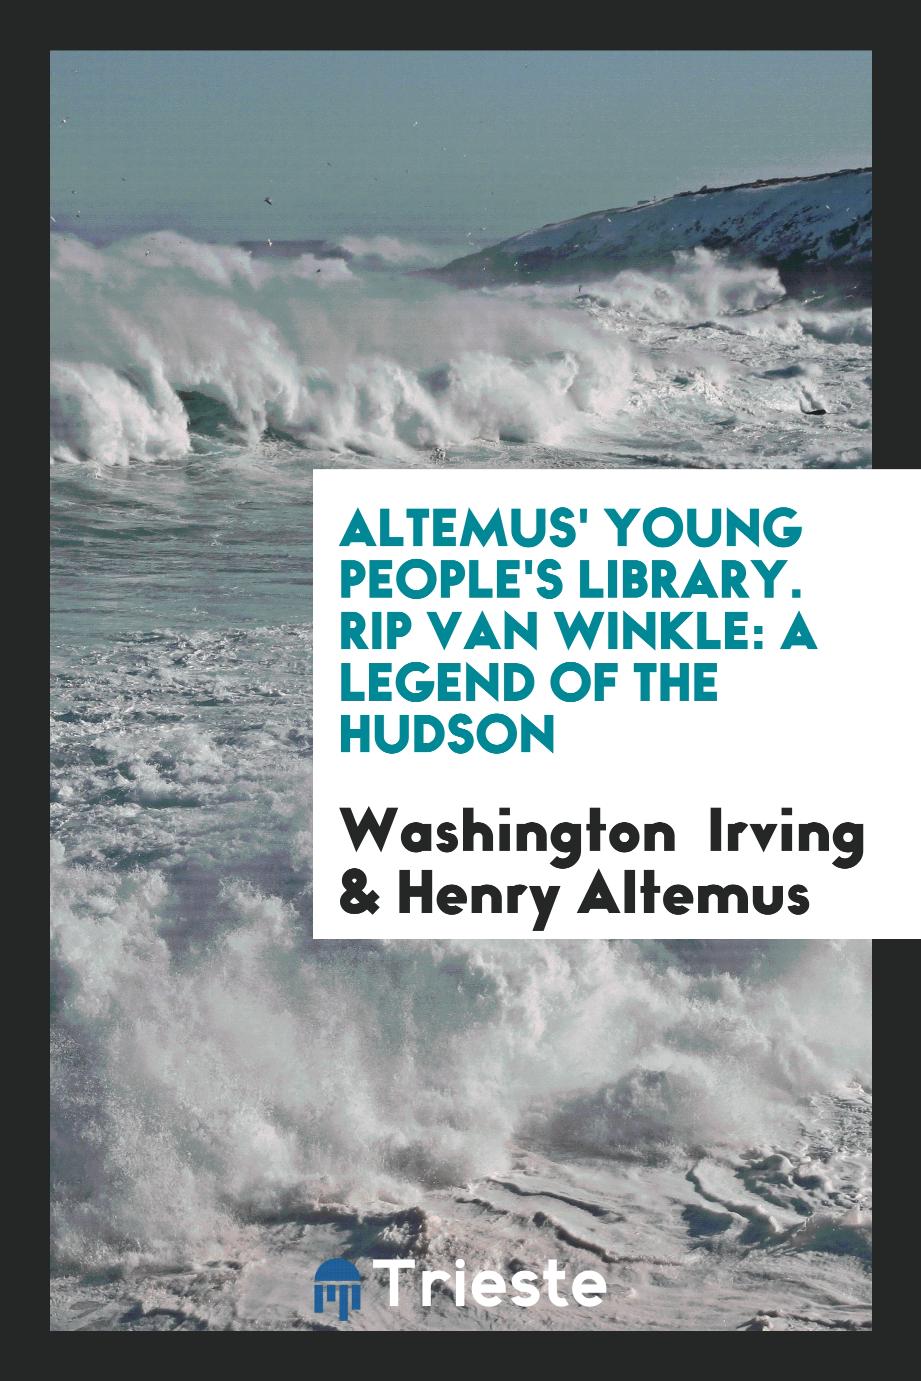 Altemus' Young People's Library. Rip Van Winkle: A Legend of the Hudson